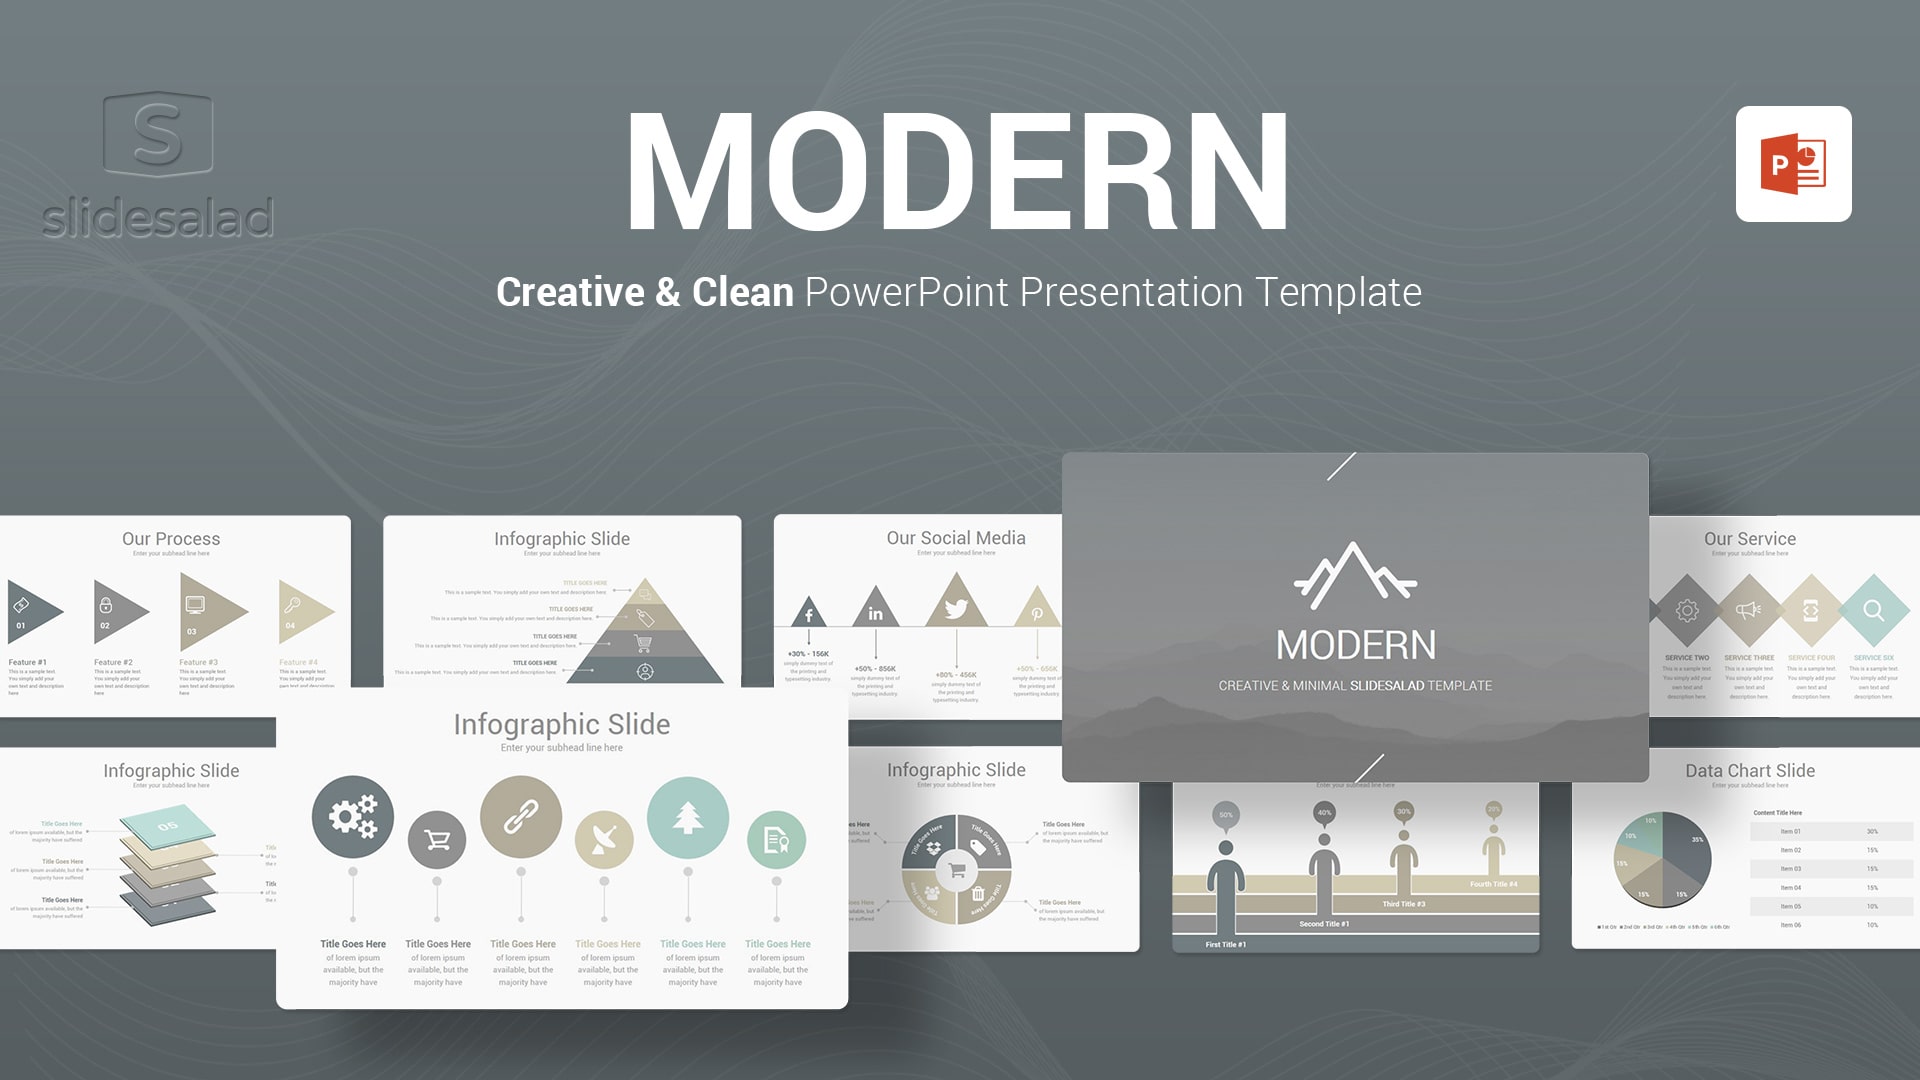 Modern PowerPoint Template for Presentation - Remote Meeting Webinar PPT Templates